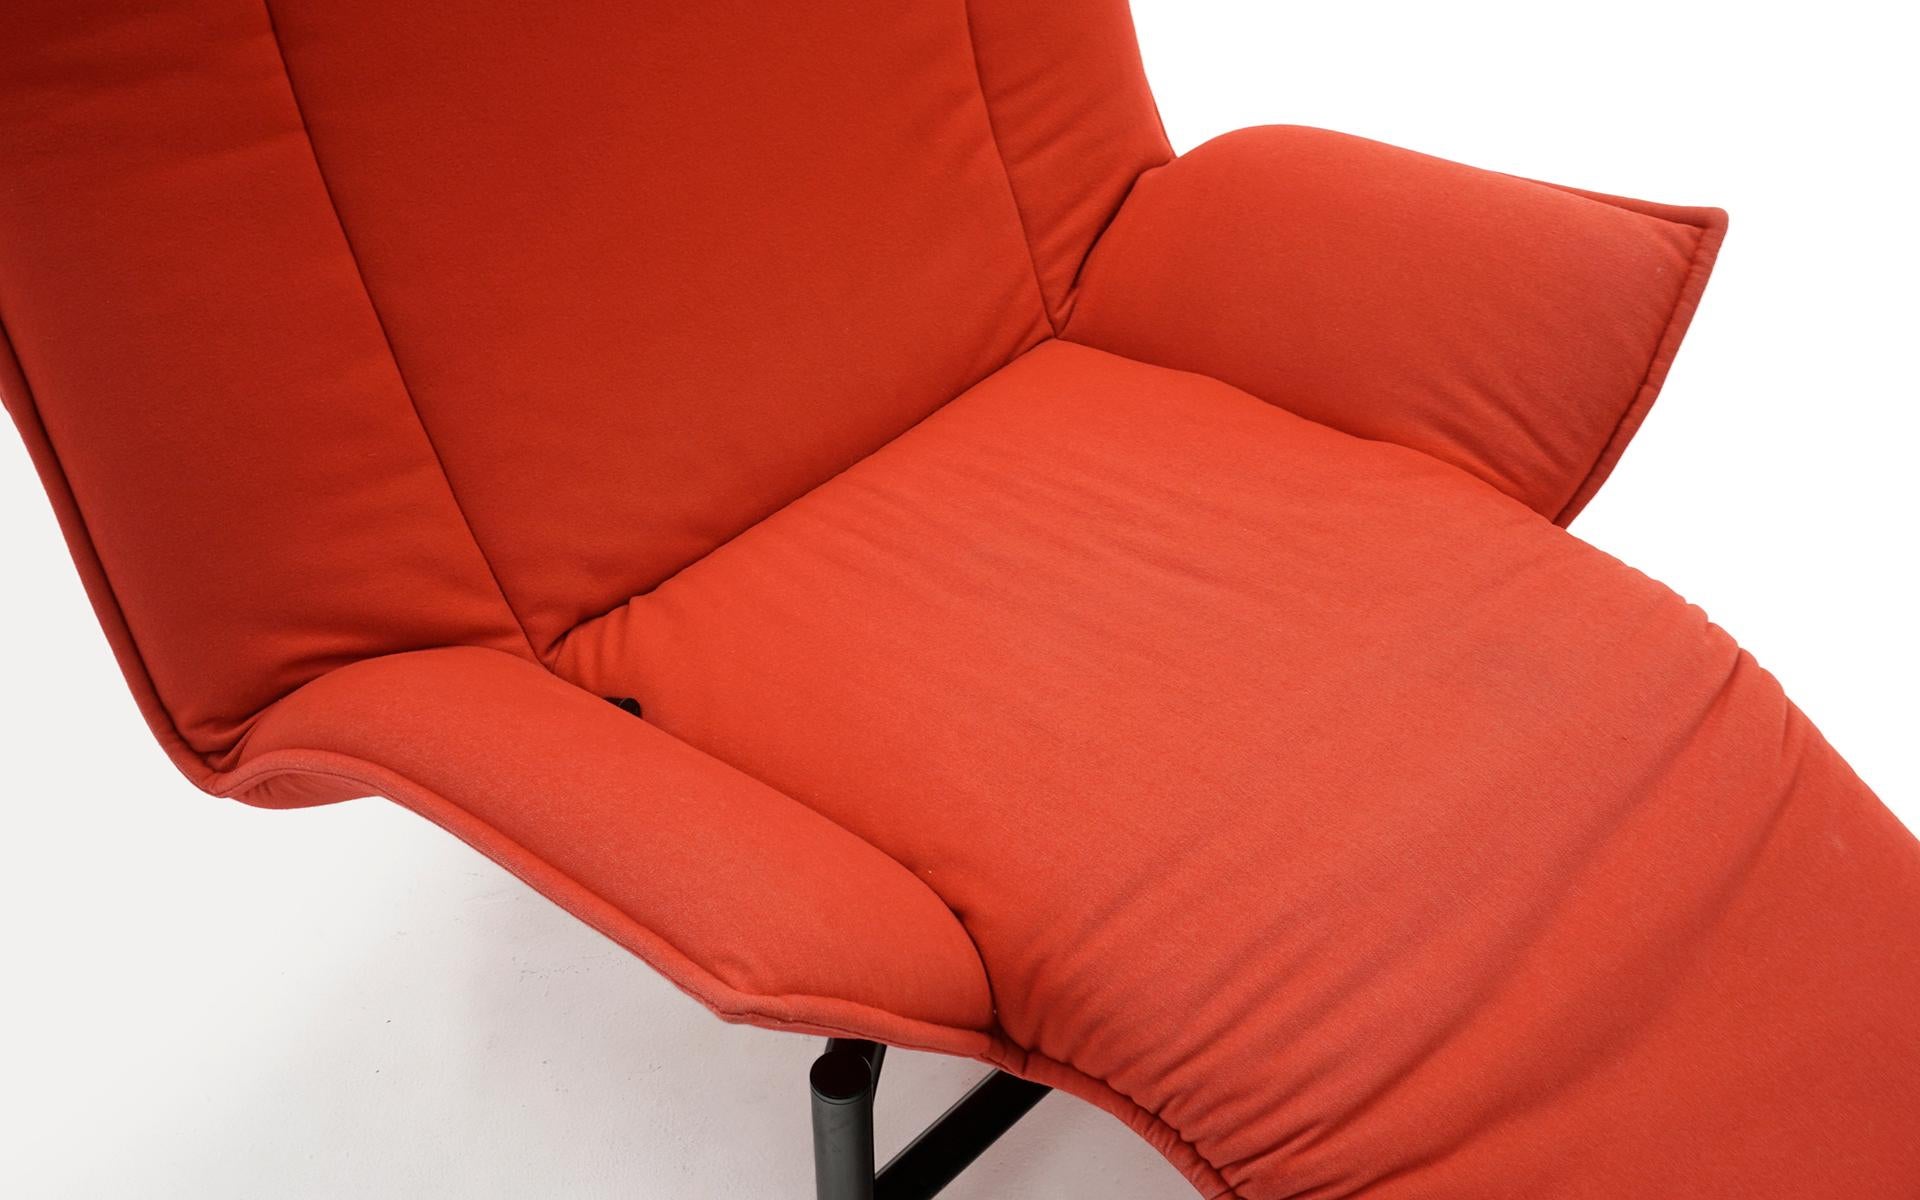 Late 20th Century Reclining Veranda Lounge Chair by Vico Magistretti for Cassina, Red, Black Frame For Sale